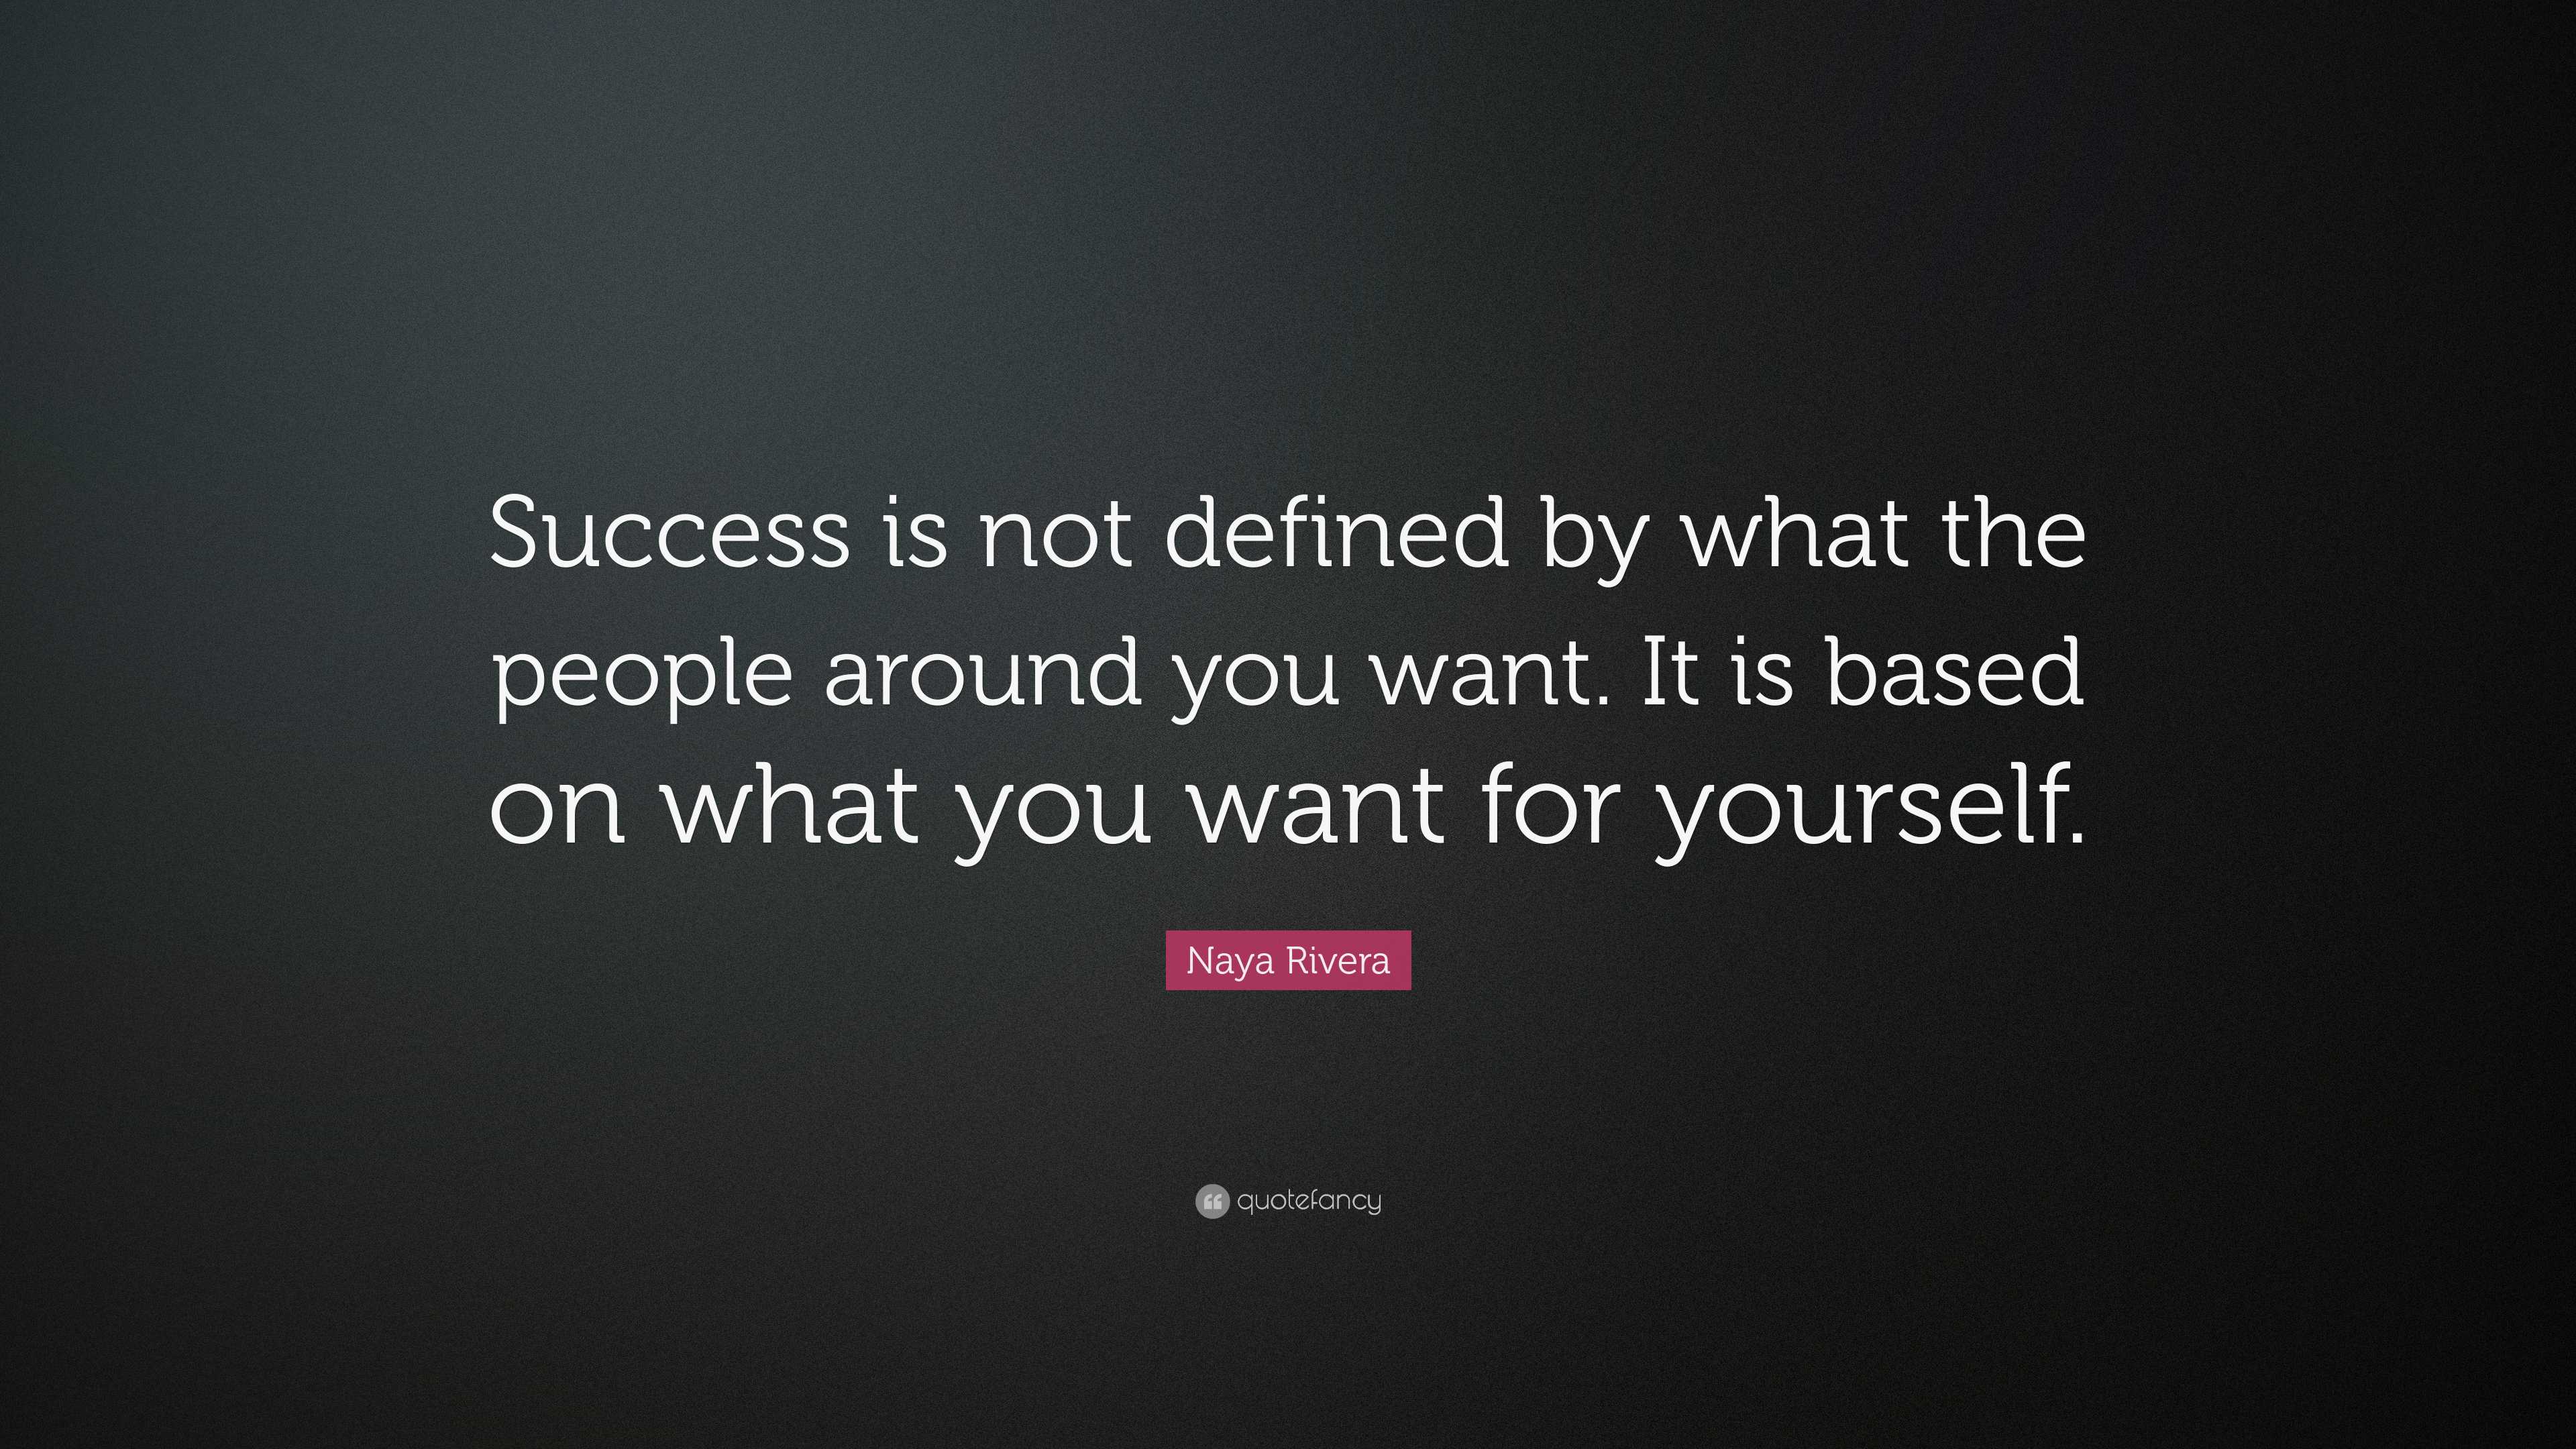 Naya Rivera Quote: “Success is not defined by what the people around ...